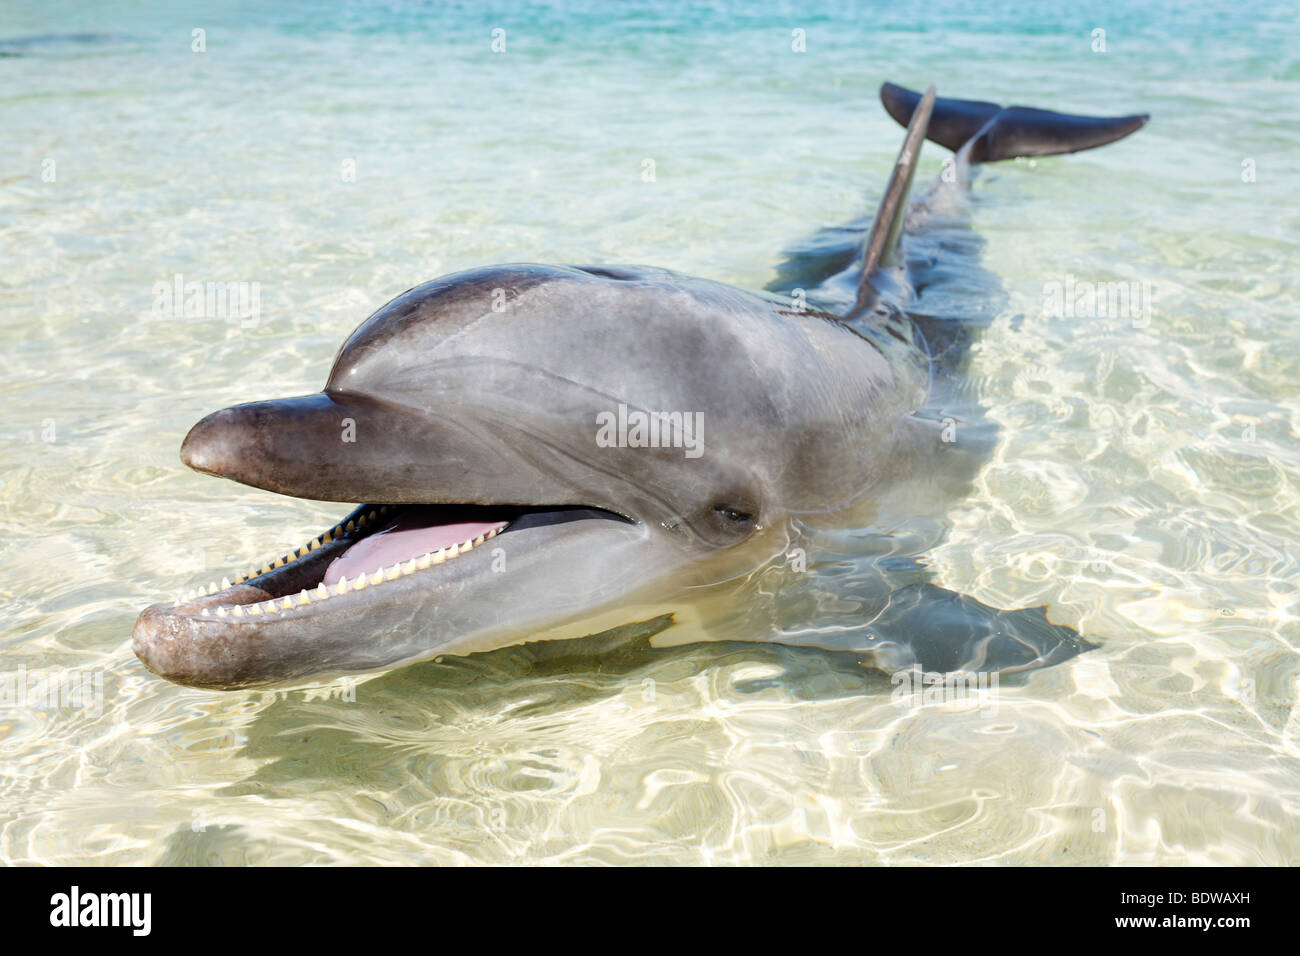 Bottlenose Dolphin (Tursiops truncatus), shallow water, Ocean Adventure, Subic Bay, Luzon, Philippines, South China Sea, Pacific Stock Photo